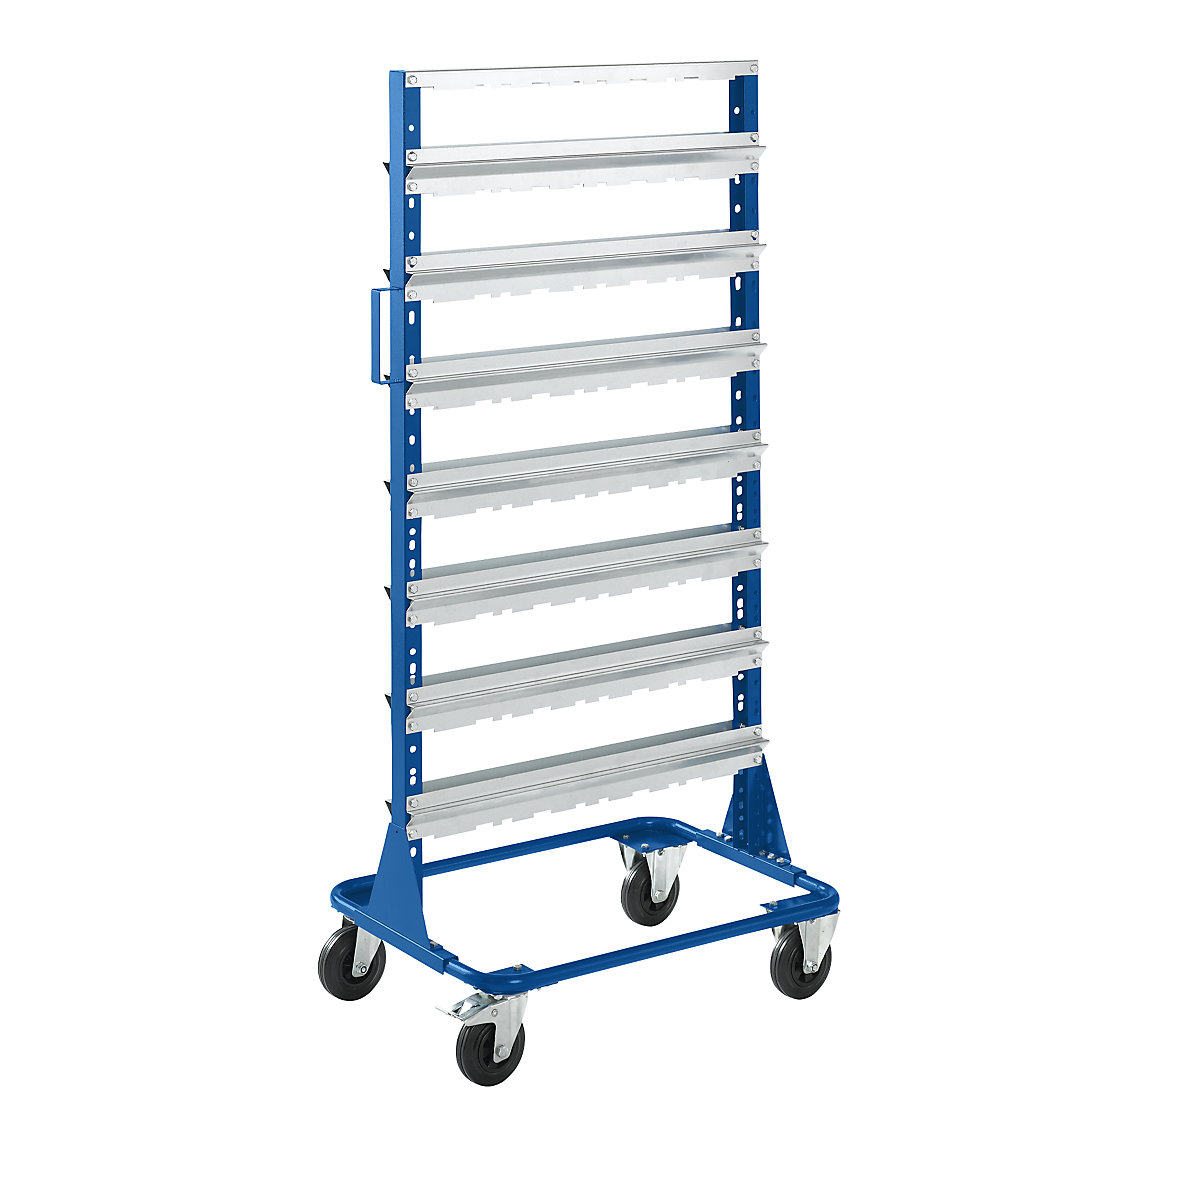 Mobile rack, height 1588 mm, mobile rack for 56 open fronted storage bins, gentian blue-4